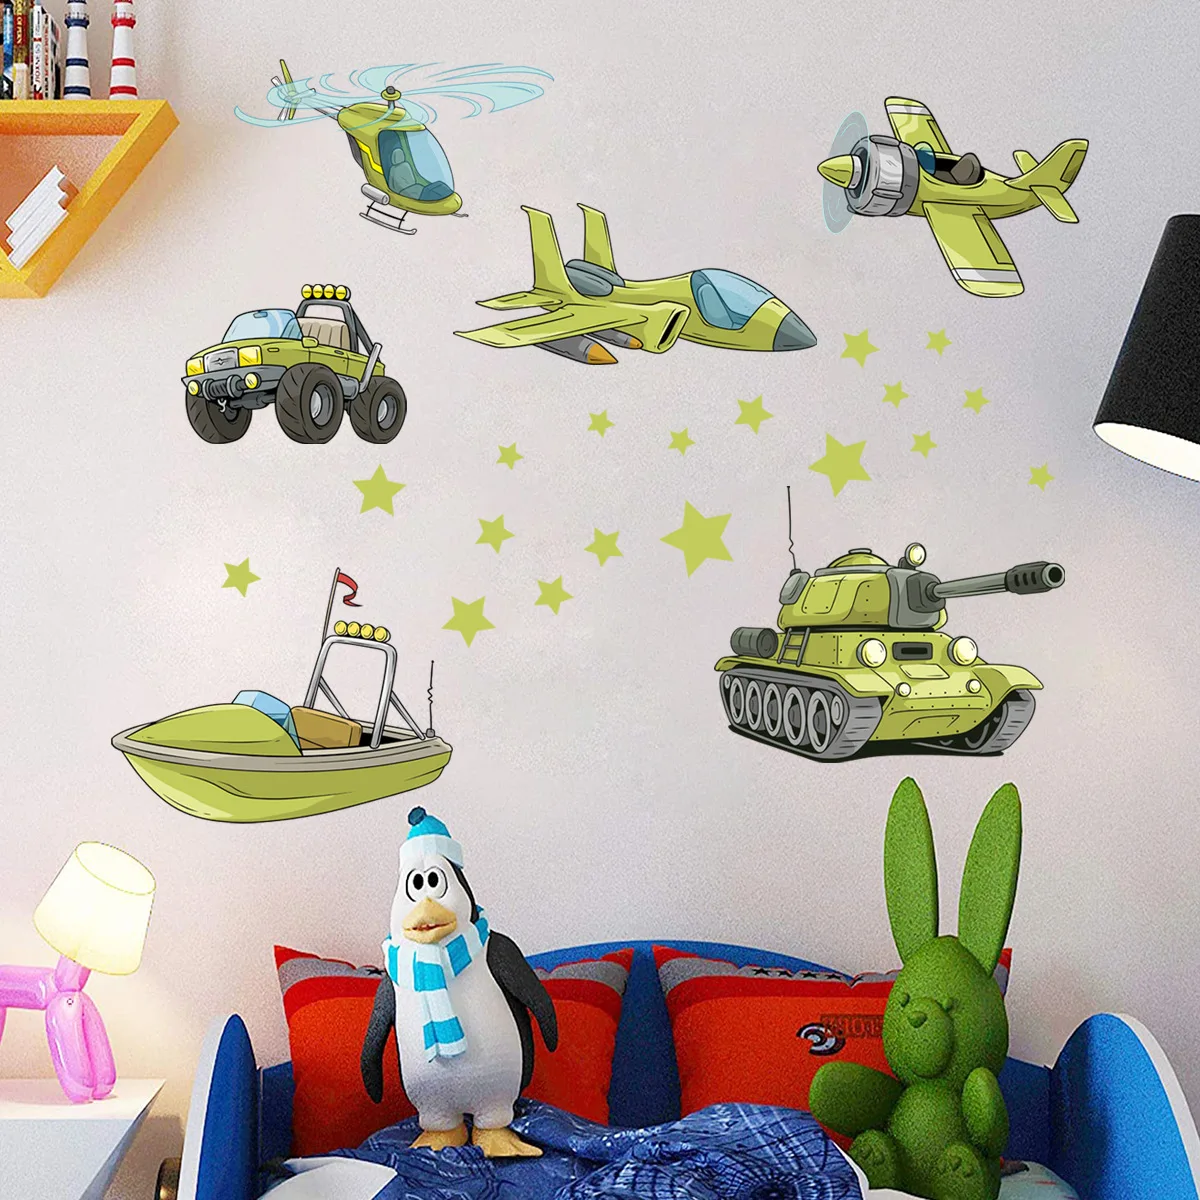 

Airplanes Cars Boats Tanks Vinyl Wall Stickers for Kids Boy Bedroom Teen Room Decoration green Decals Nursery Wall Decor Mural